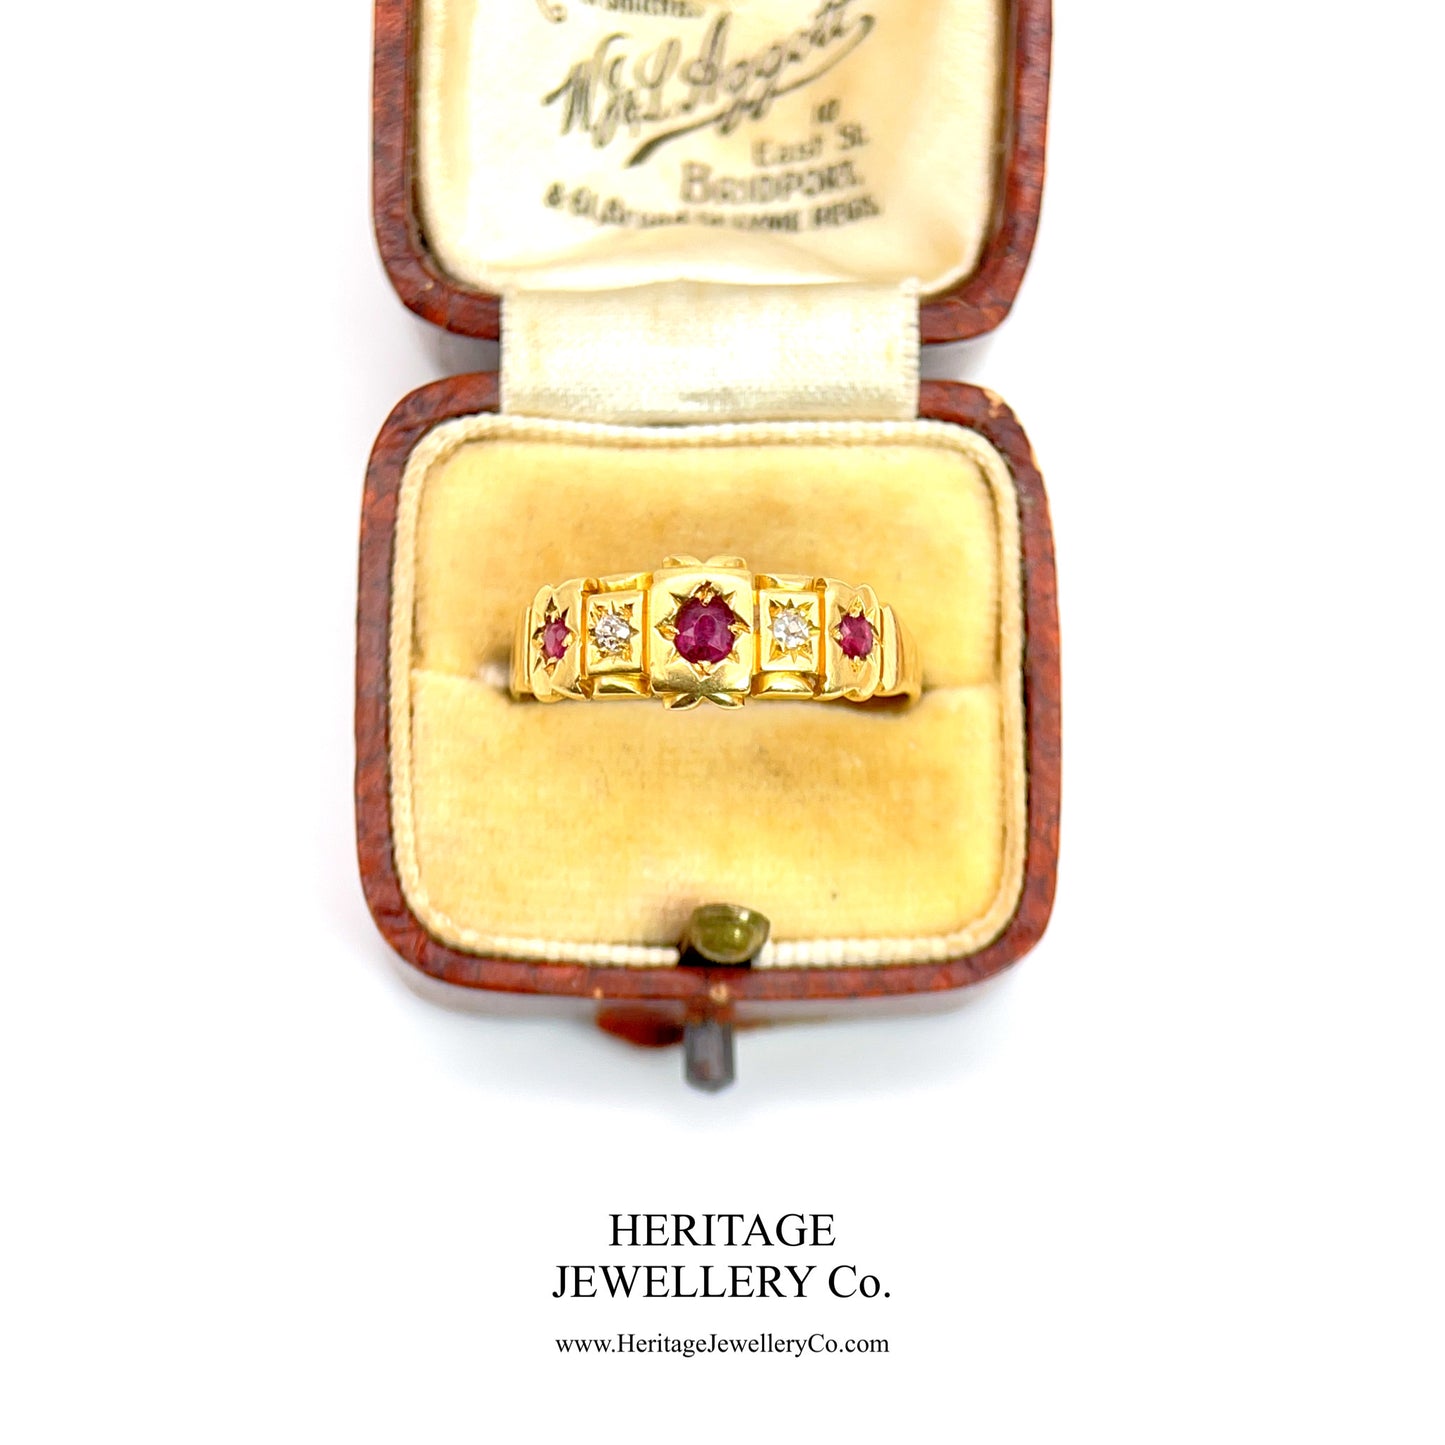 Victorian Ruby and Diamond Ring (c. 1890-1900)